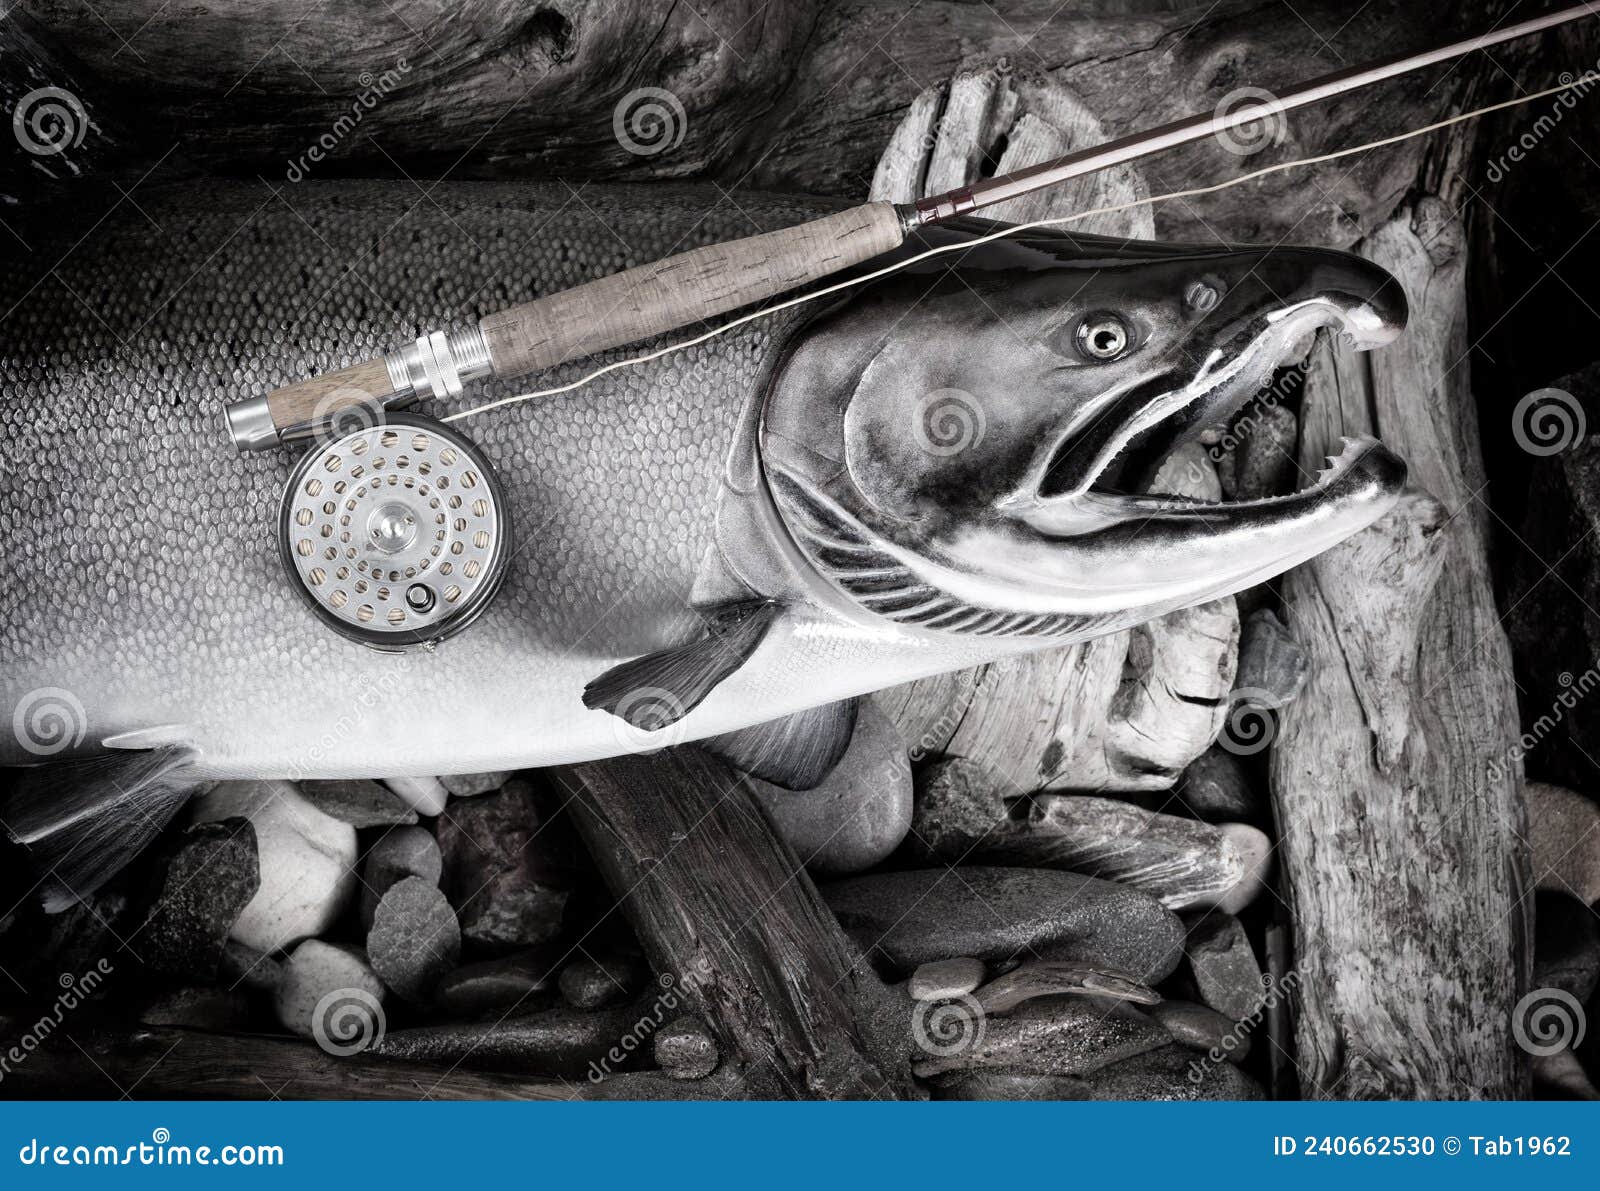 https://thumbs.dreamstime.com/z/vintage-fly-fishing-equipment-large-salmon-riverbed-setting-antique-rod-reel-top-stones-drift-wood-background-240662530.jpg